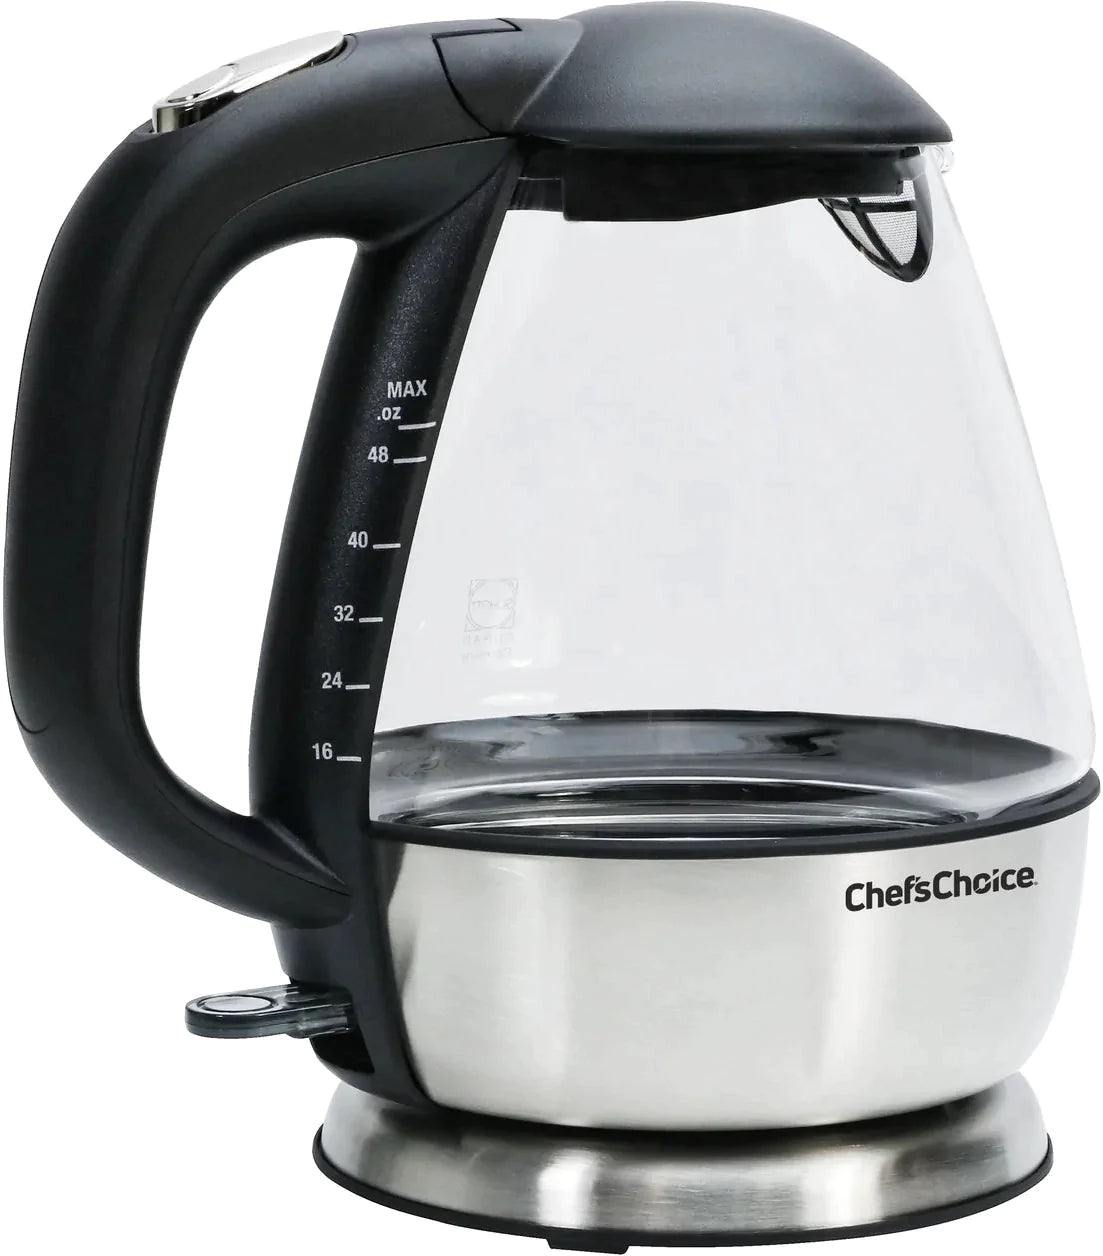  Dualit 72955 Design Series Kettle, Black and Steel, 1.5L: Home  & Kitchen